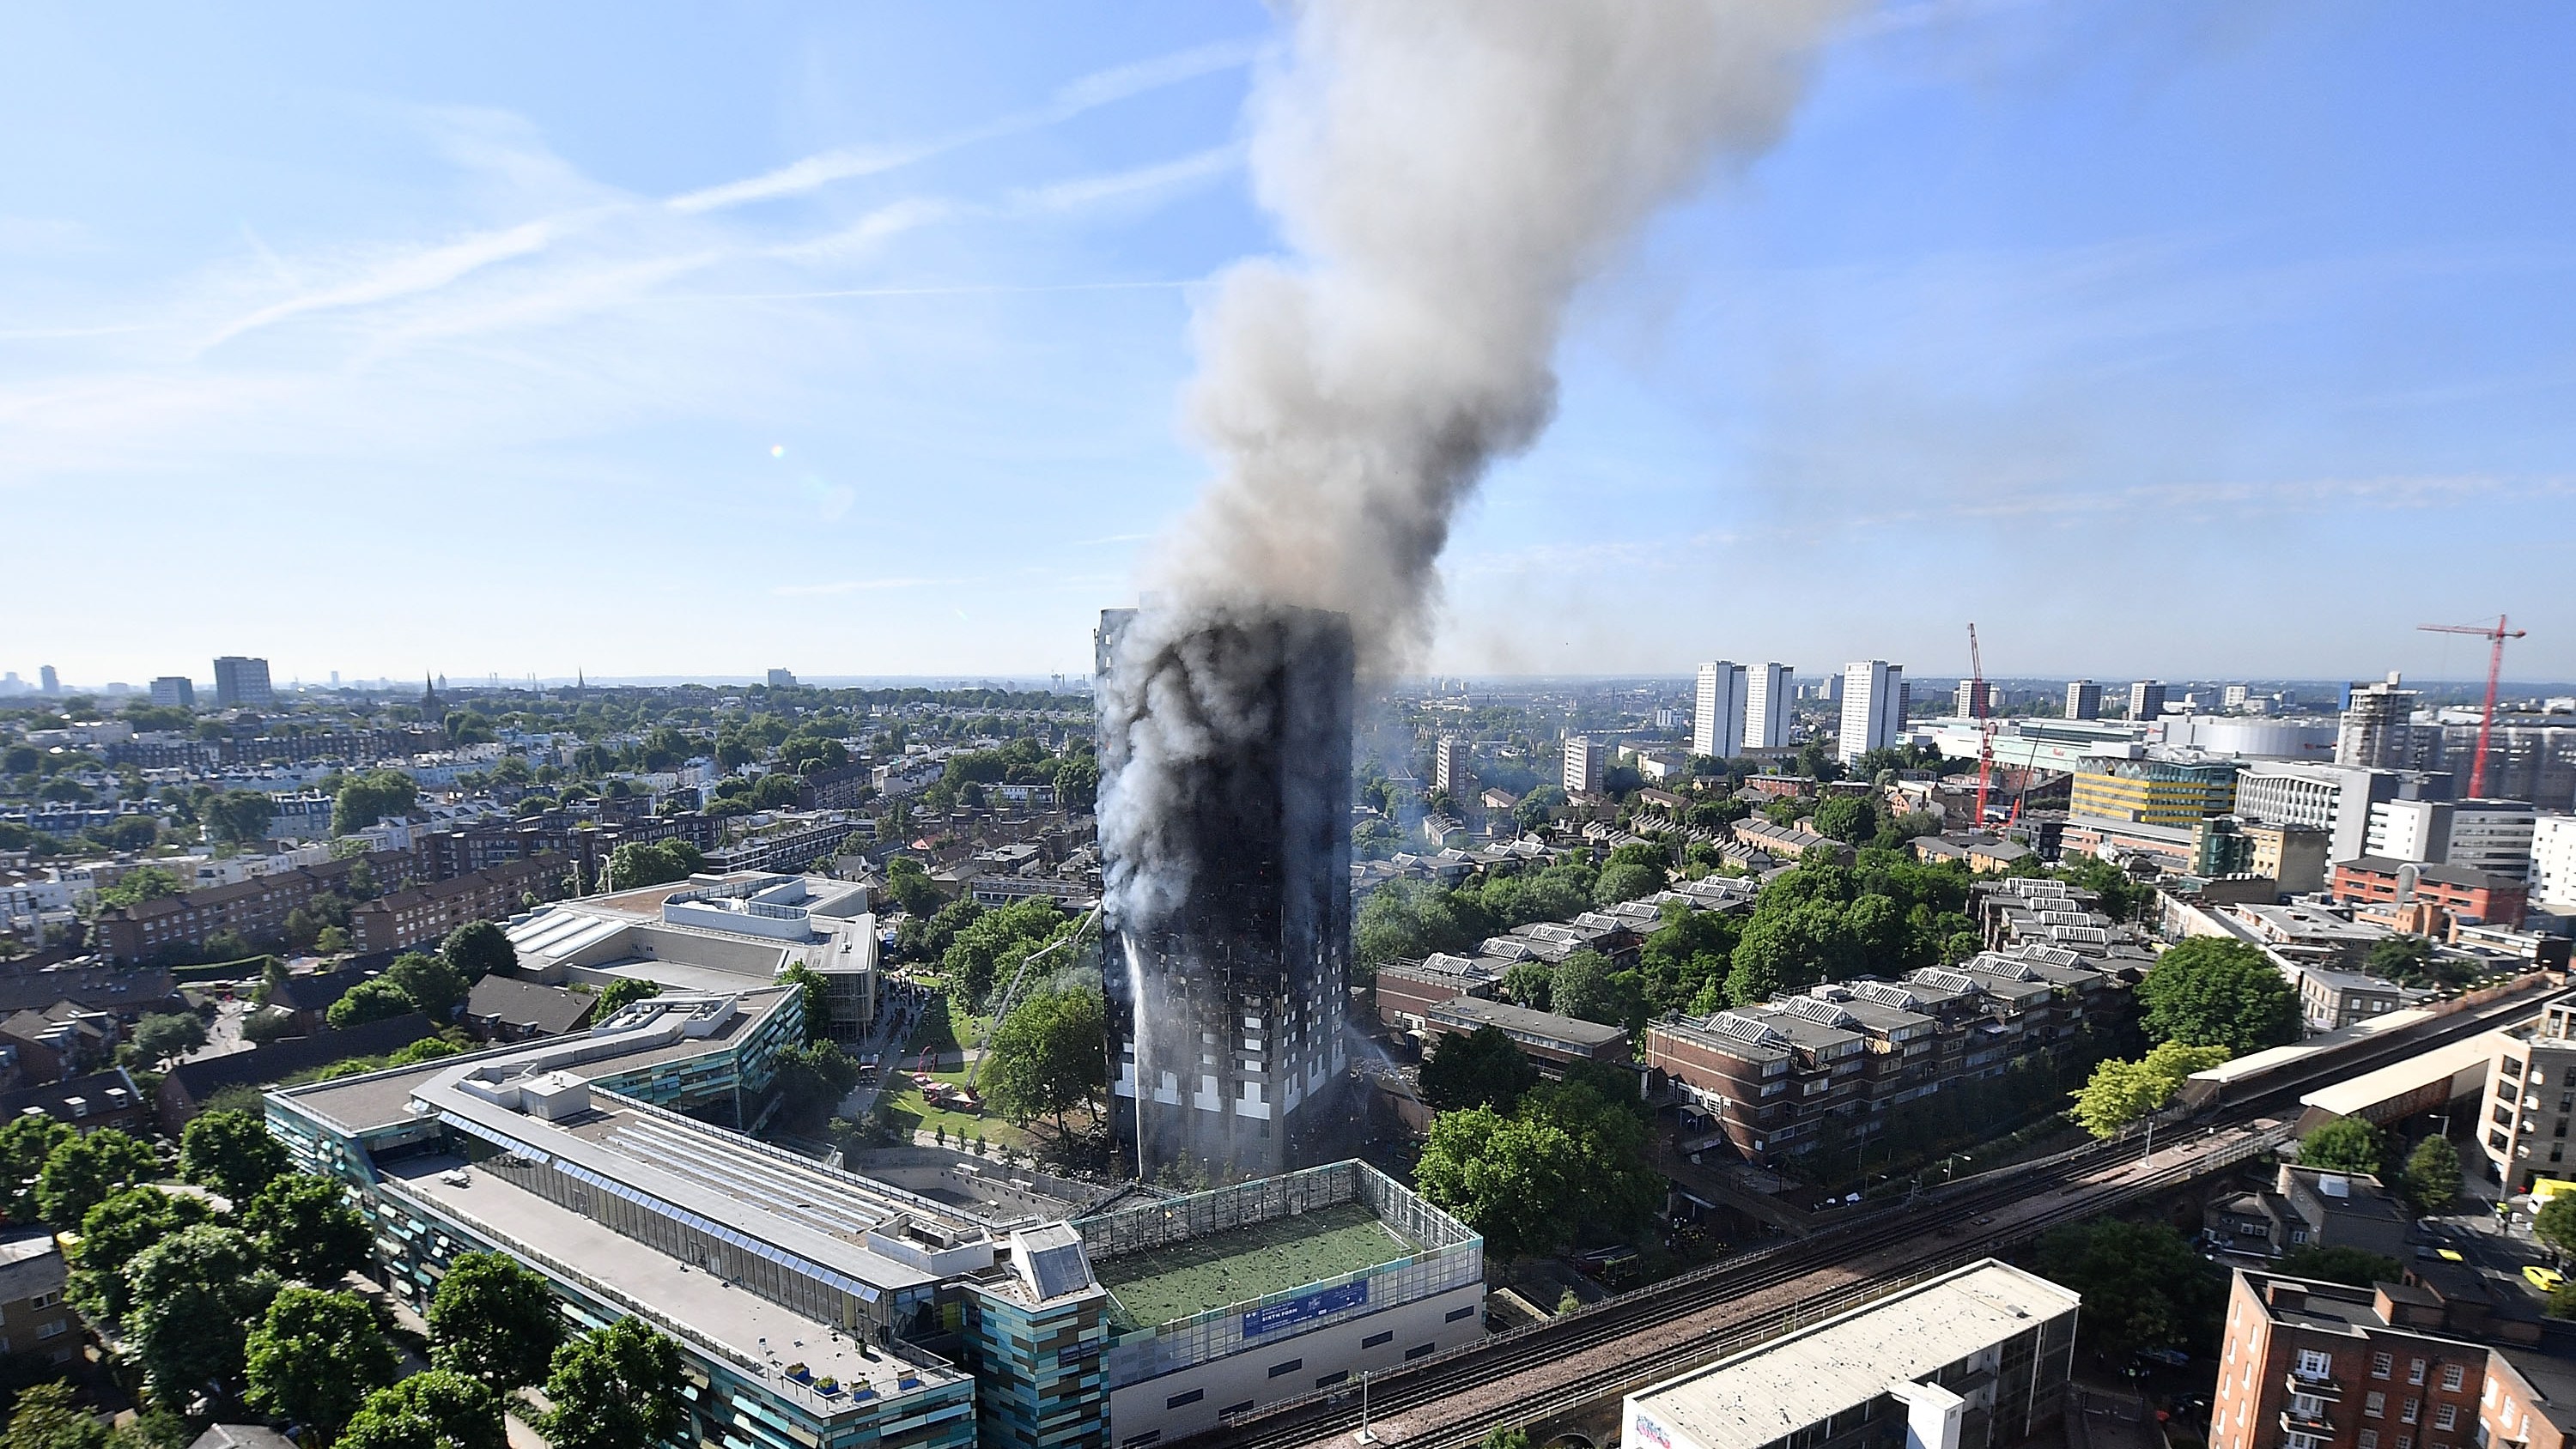 Failure to act on the recommendations made by the chairs of inquiries could lead to another tragedy, such as that of Grenfell